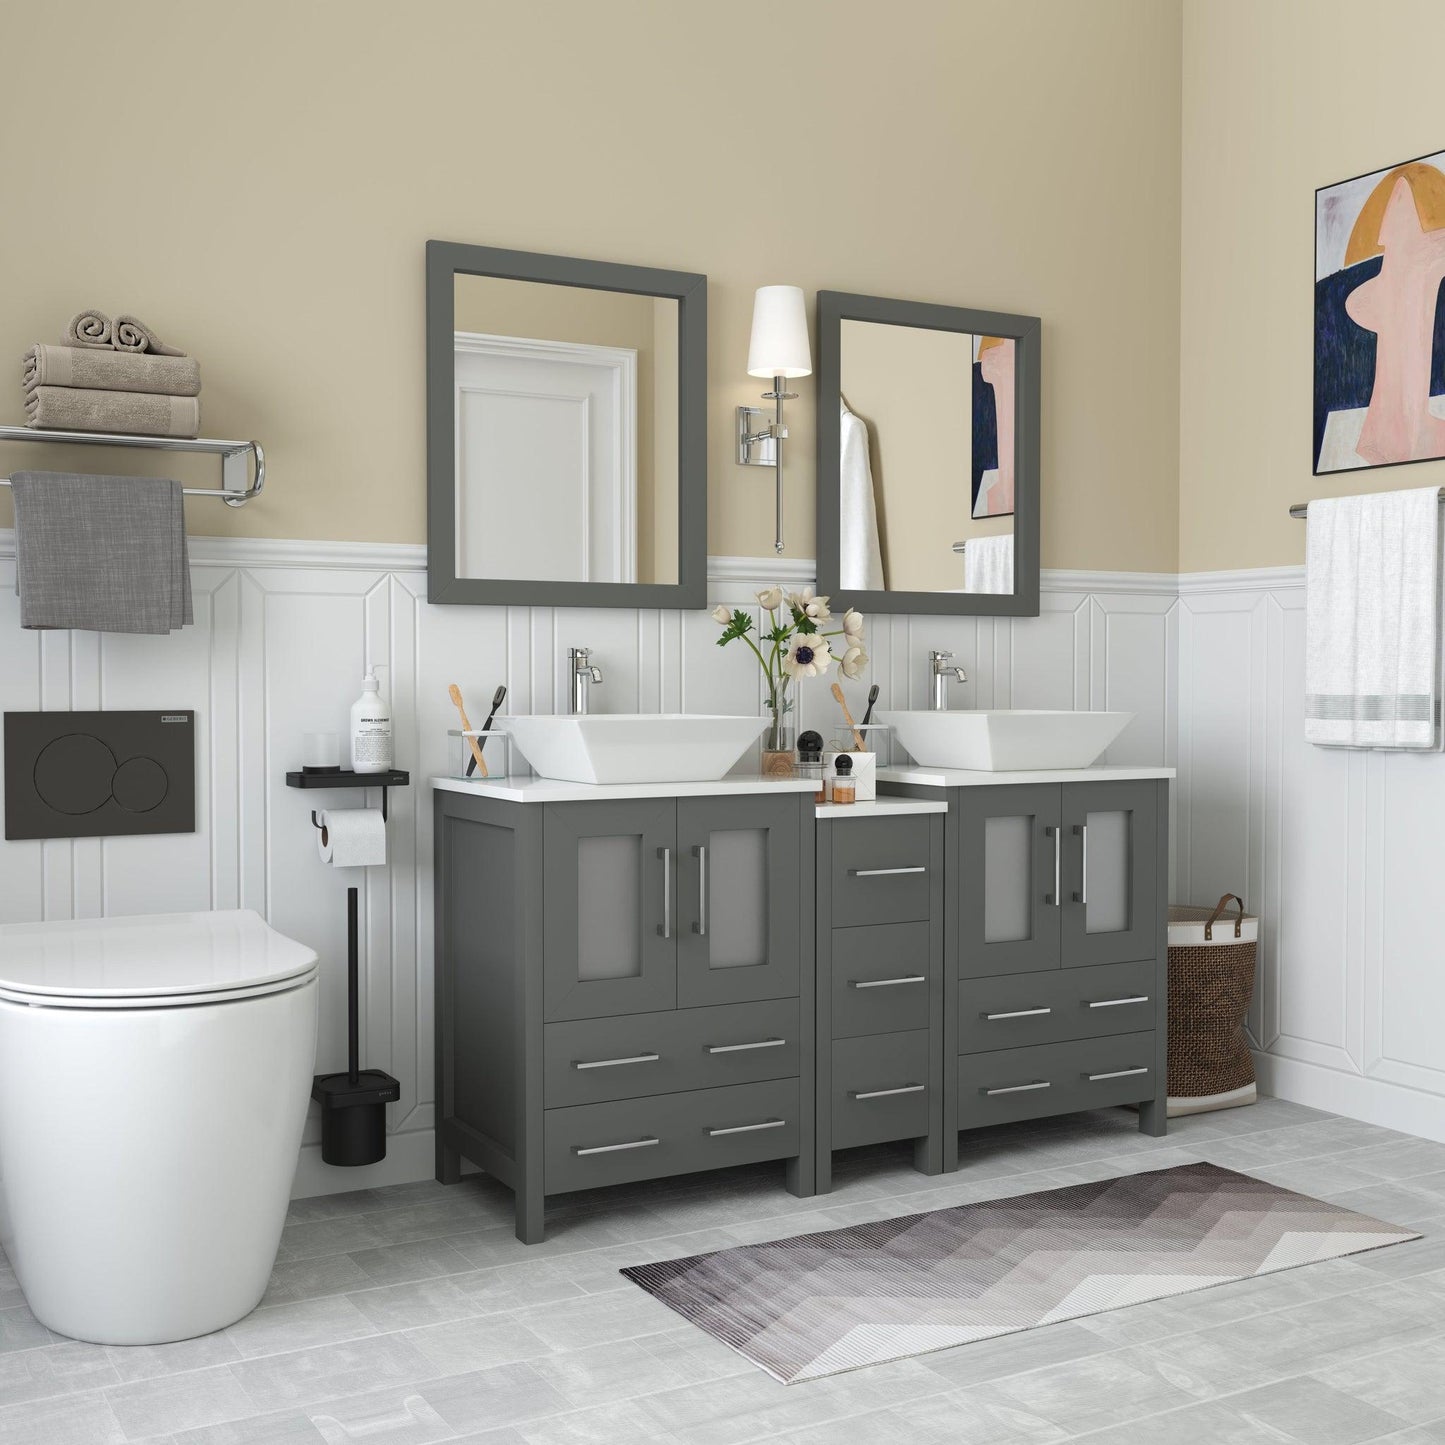 Vanity Art Ravenna 60" Double Gray Freestanding Vanity Set With White Engineered Marble Top, 2 Ceramic Vessel Sinks, 1 Side Cabinet and 2 Mirrors